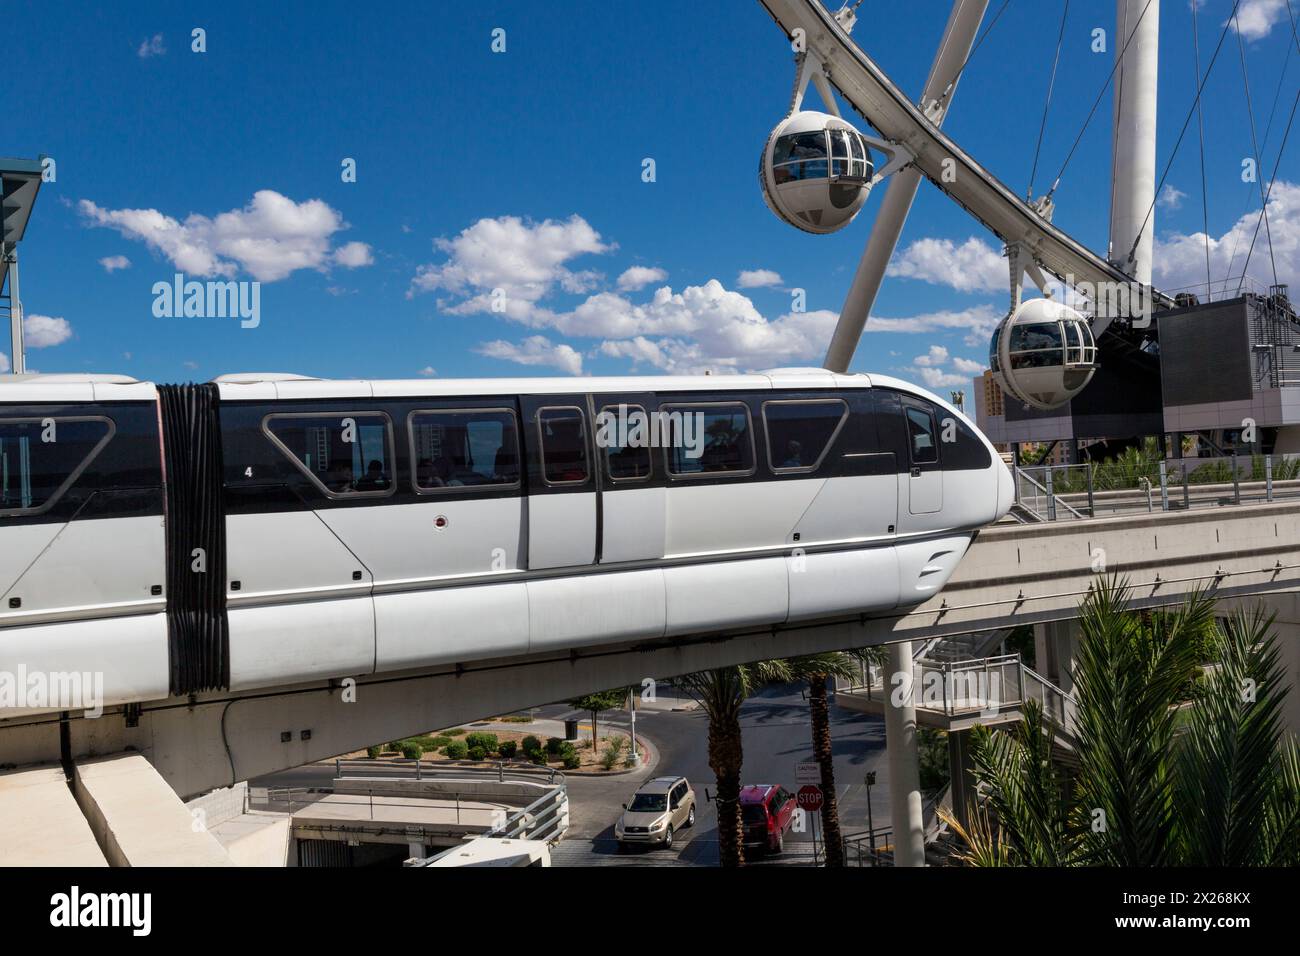 Las Vegas, Nevada.  Monorail, with High Roller in background.  The High Roller is the world's tallest observation wheel, as of 2015. Stock Photo